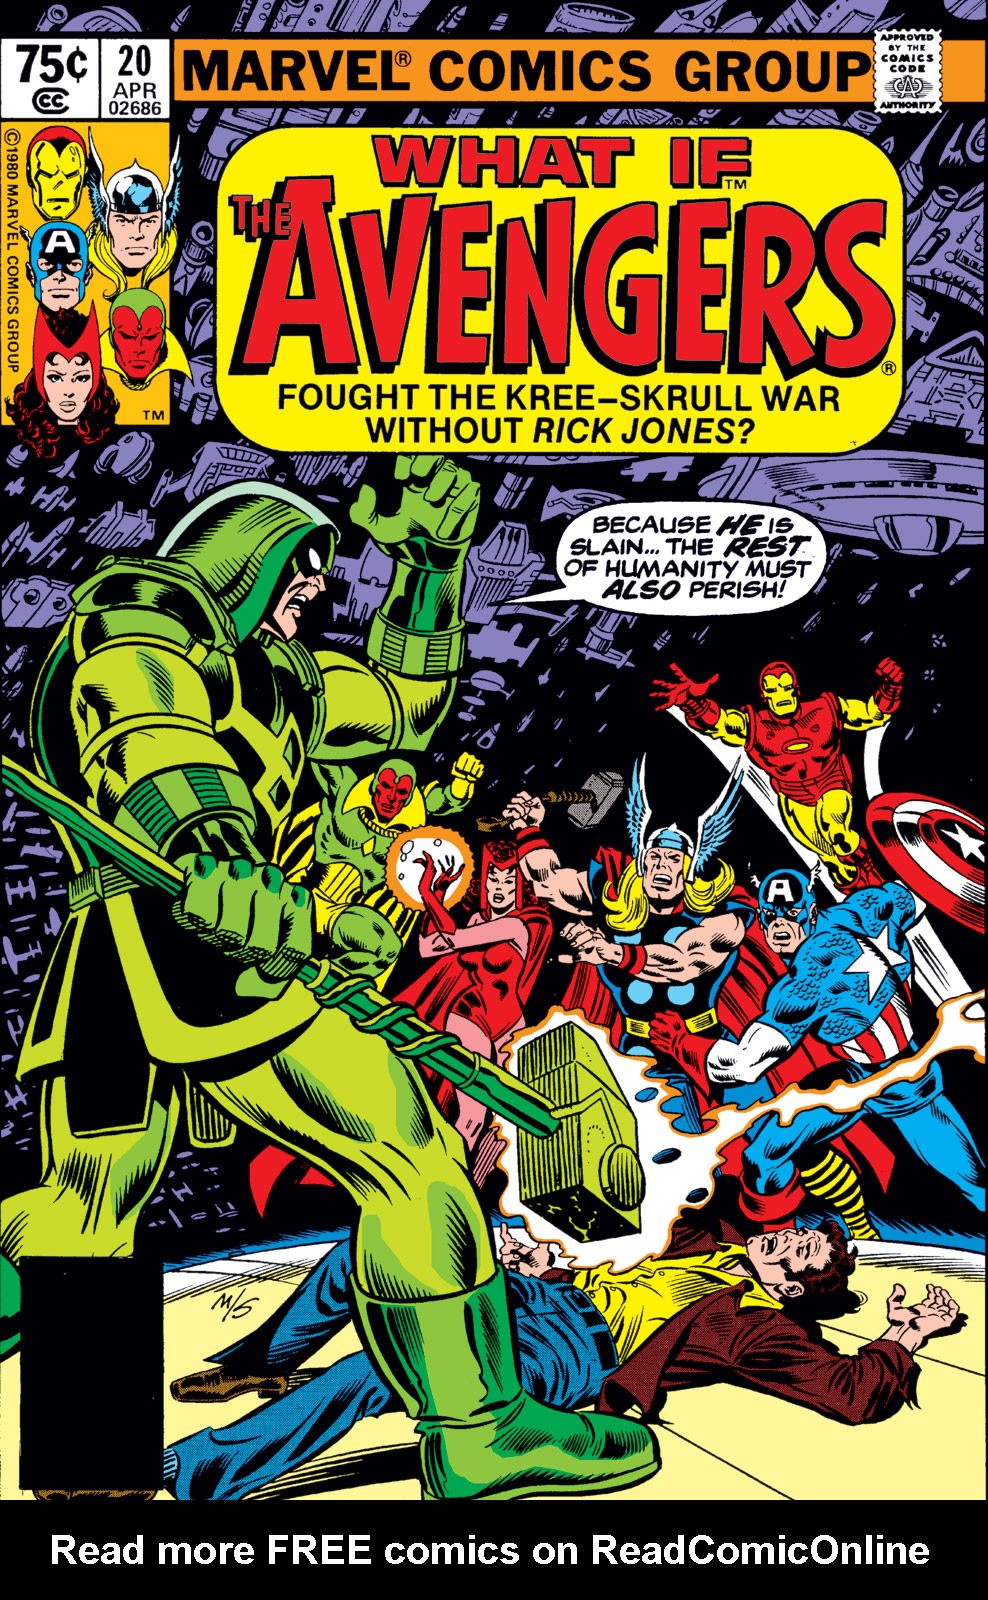 Read online What If? (1977) comic -  Issue #20 - The Avengers fought the Kree-Skrull war without Rick Jones - 1